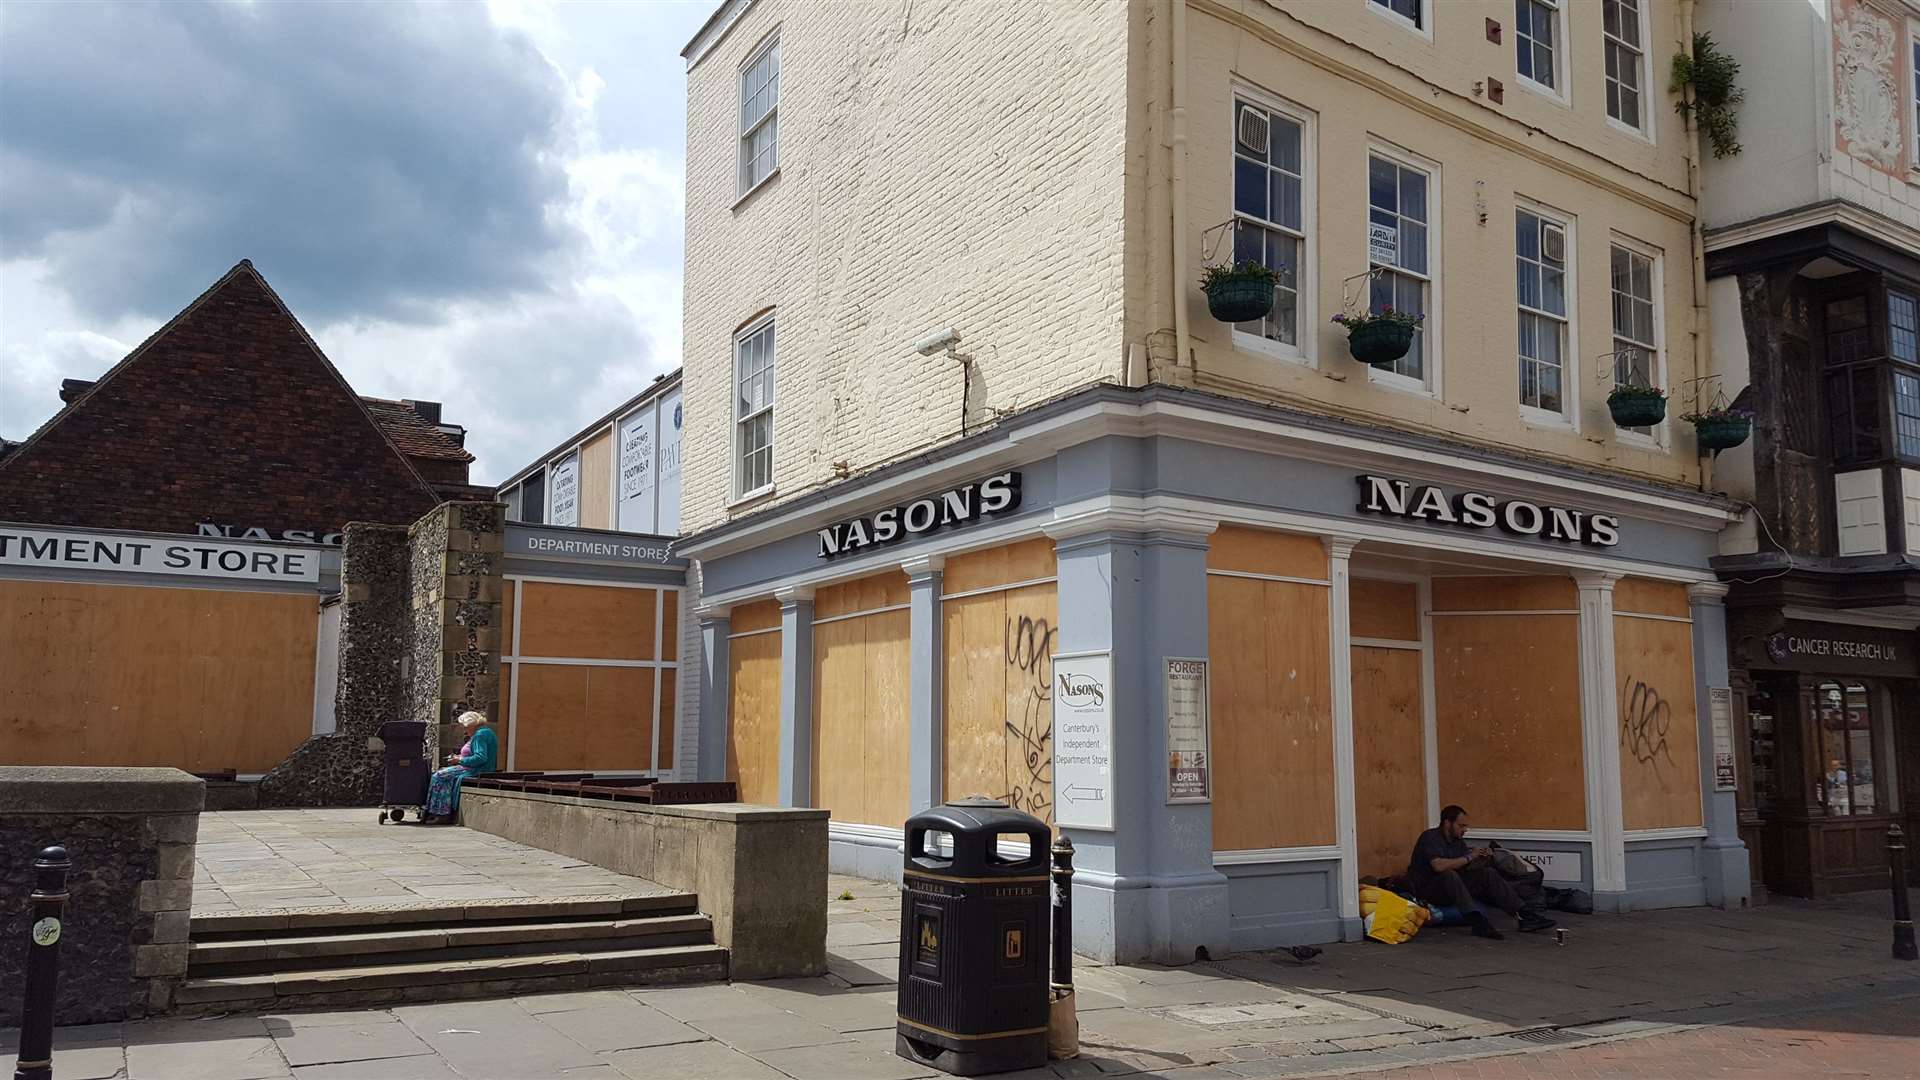 The boarded-up former Nasons department store in High Street, Canterbury